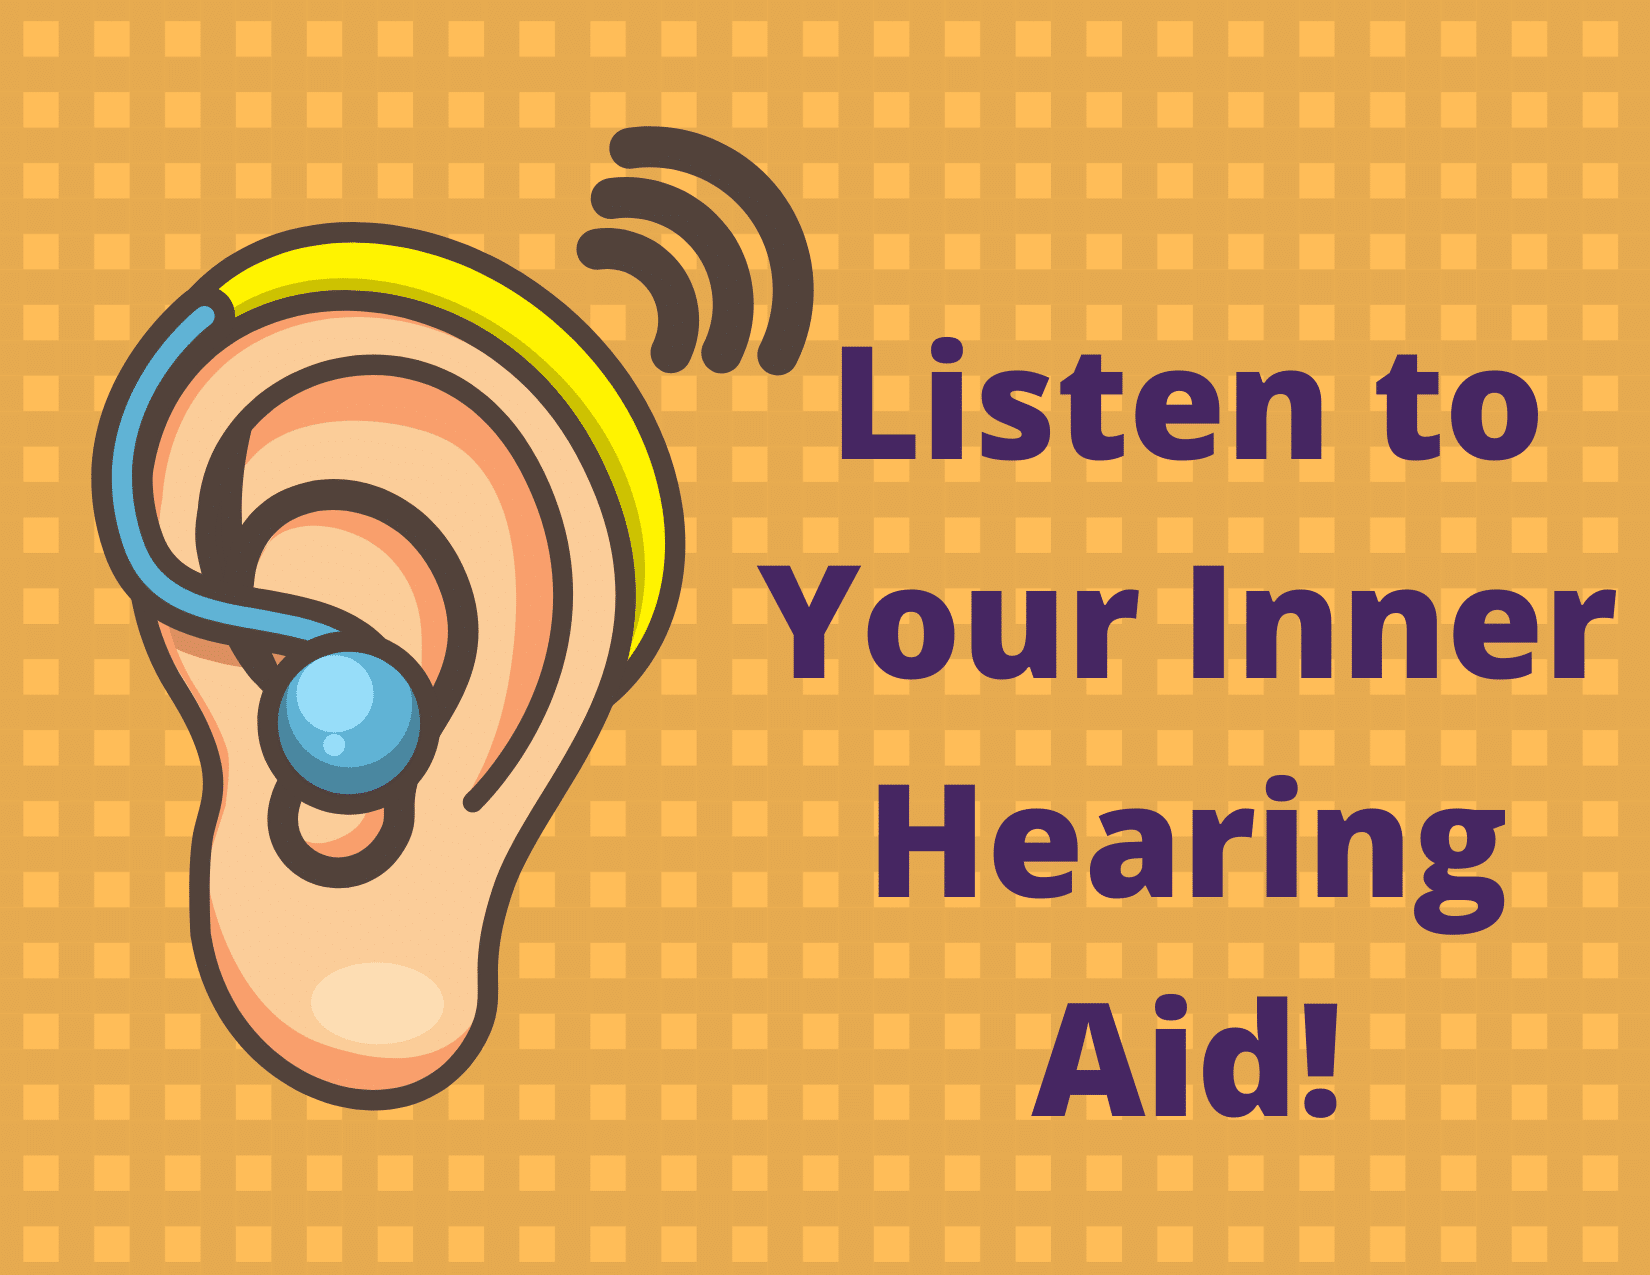 Featured image for “Listen to Your Inner Hearing Aid!”